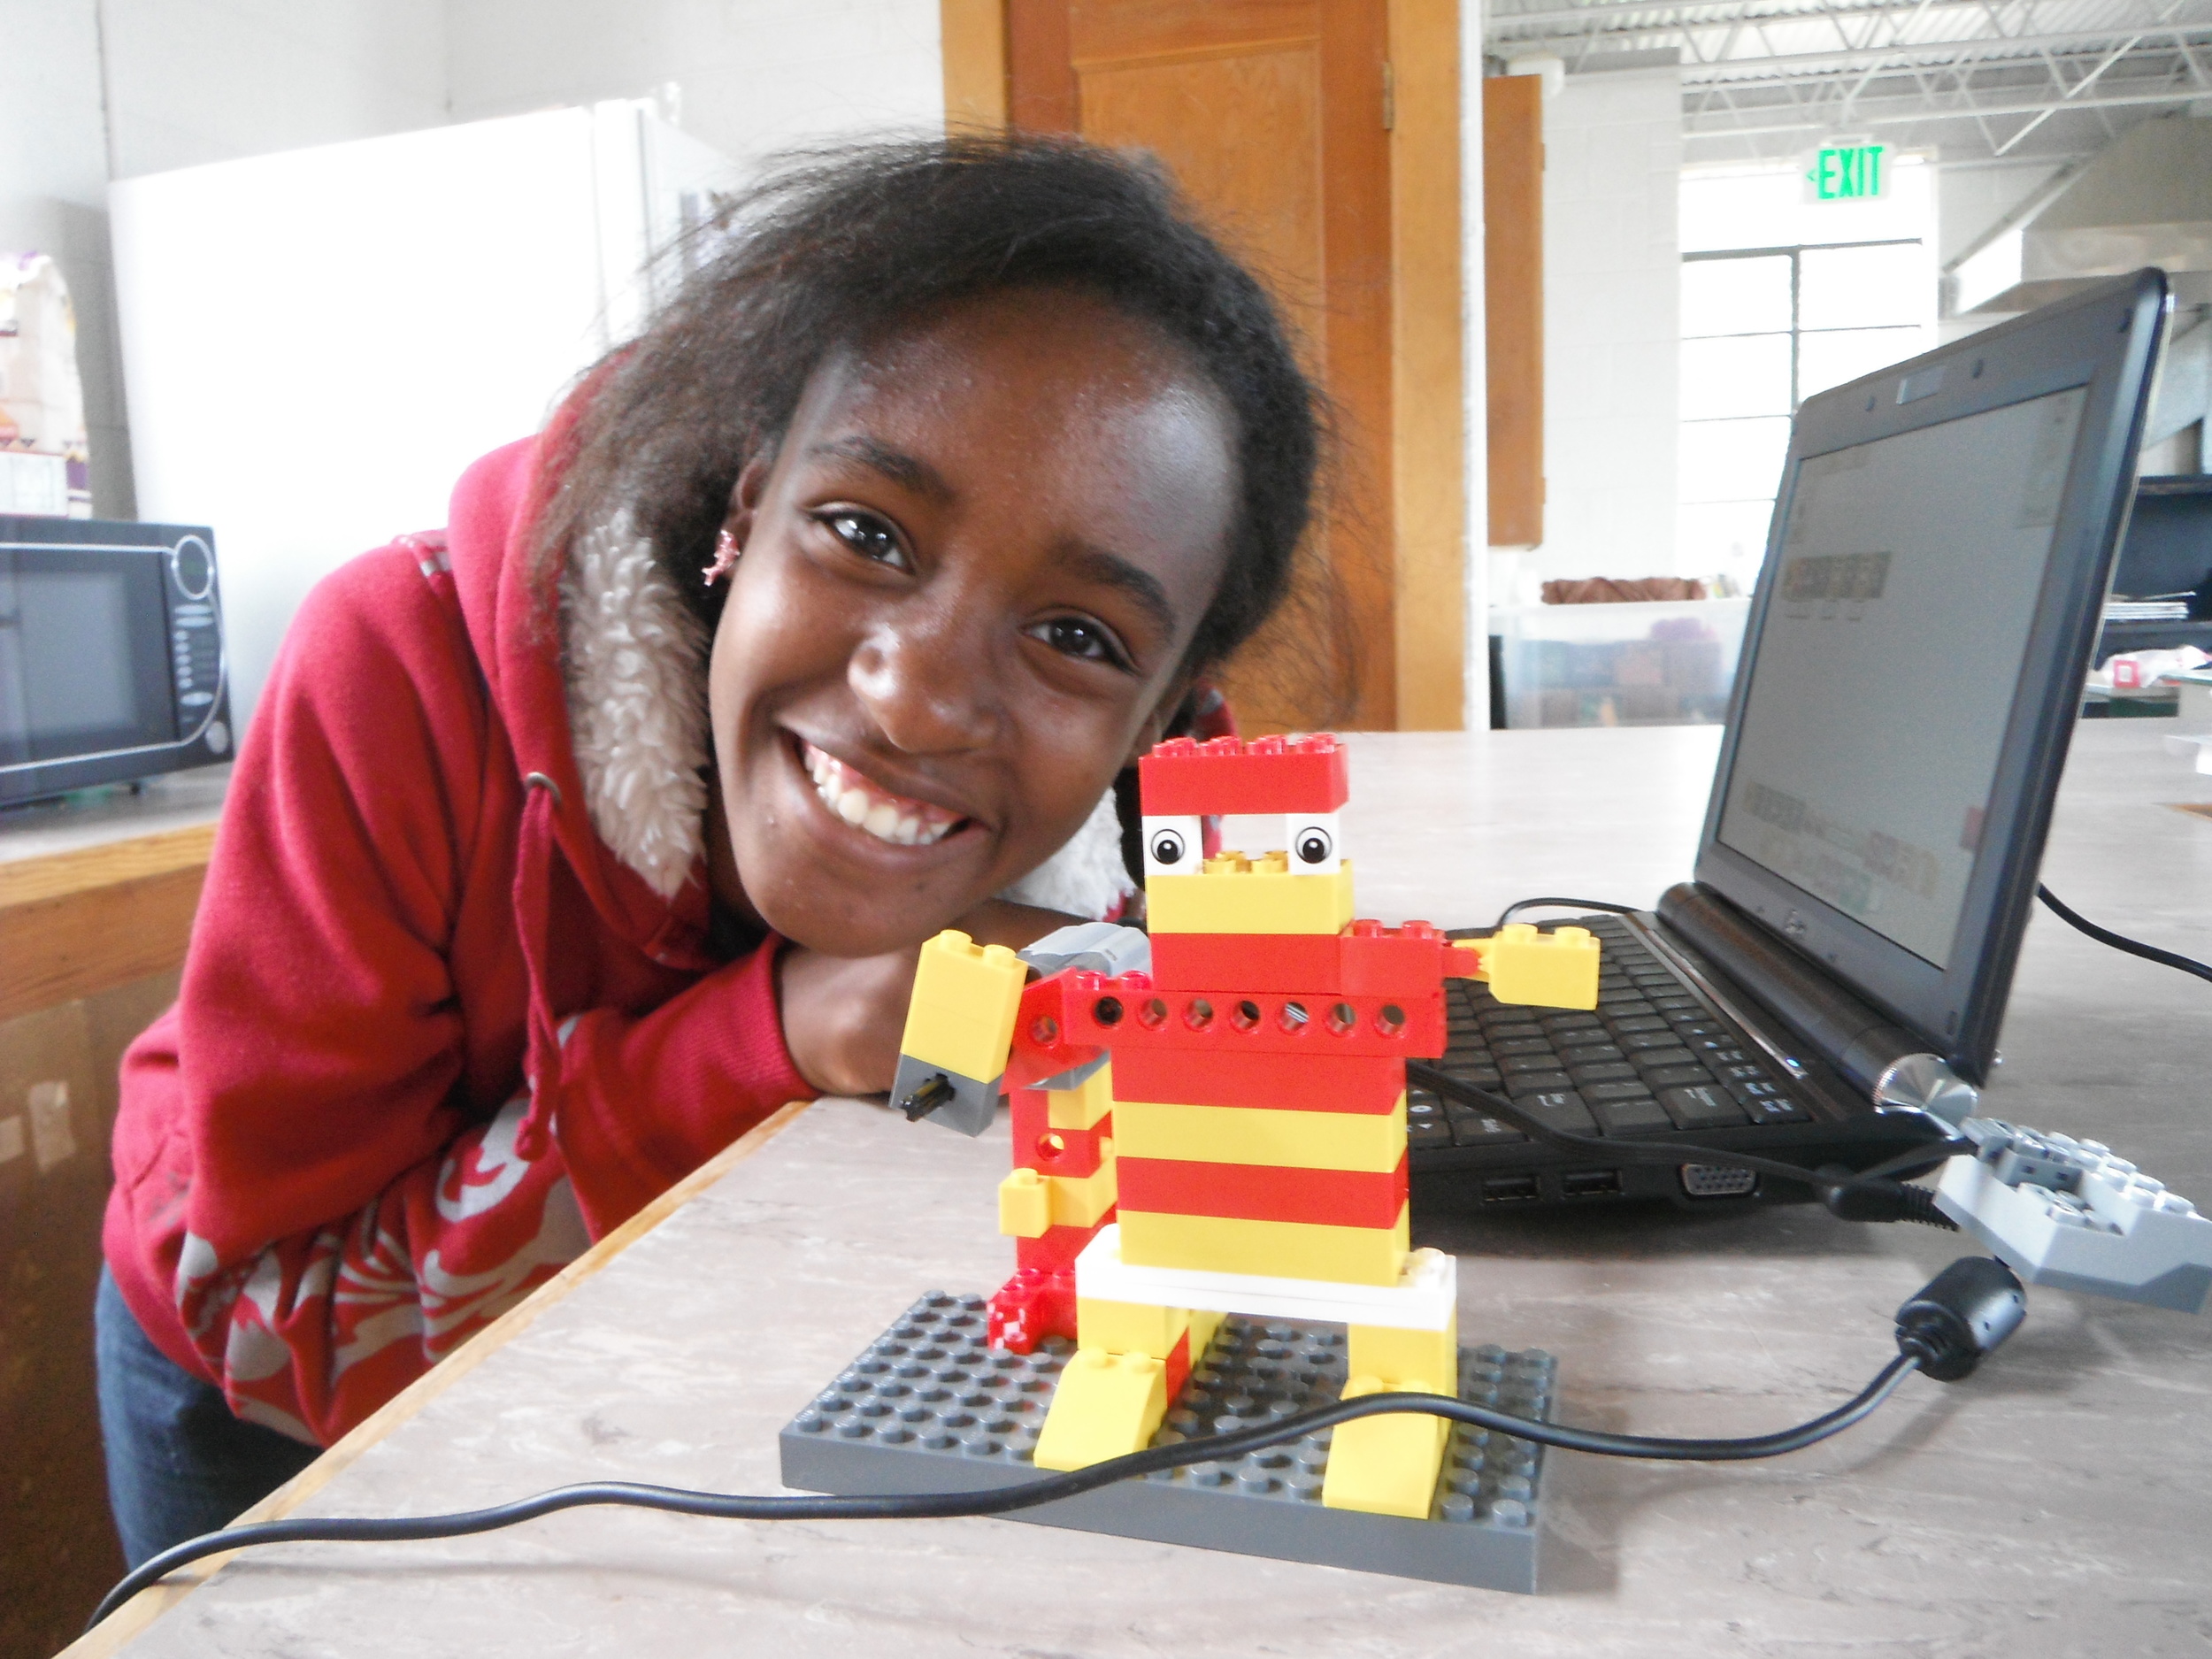 Camper with her robot.